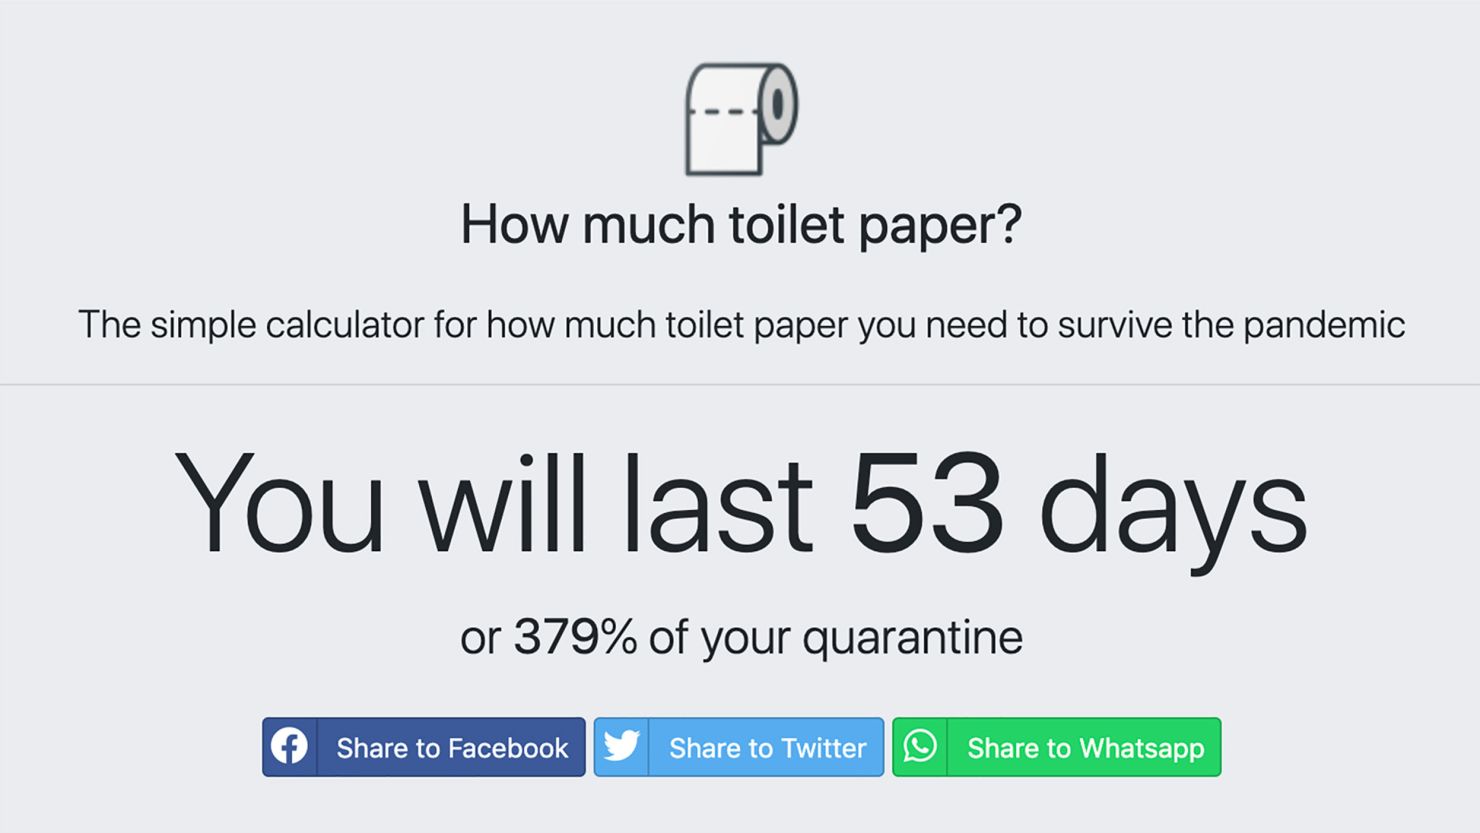 Howmuchtoiletpaper.com calculates just how long your stash of TP will last you during a quarantine.